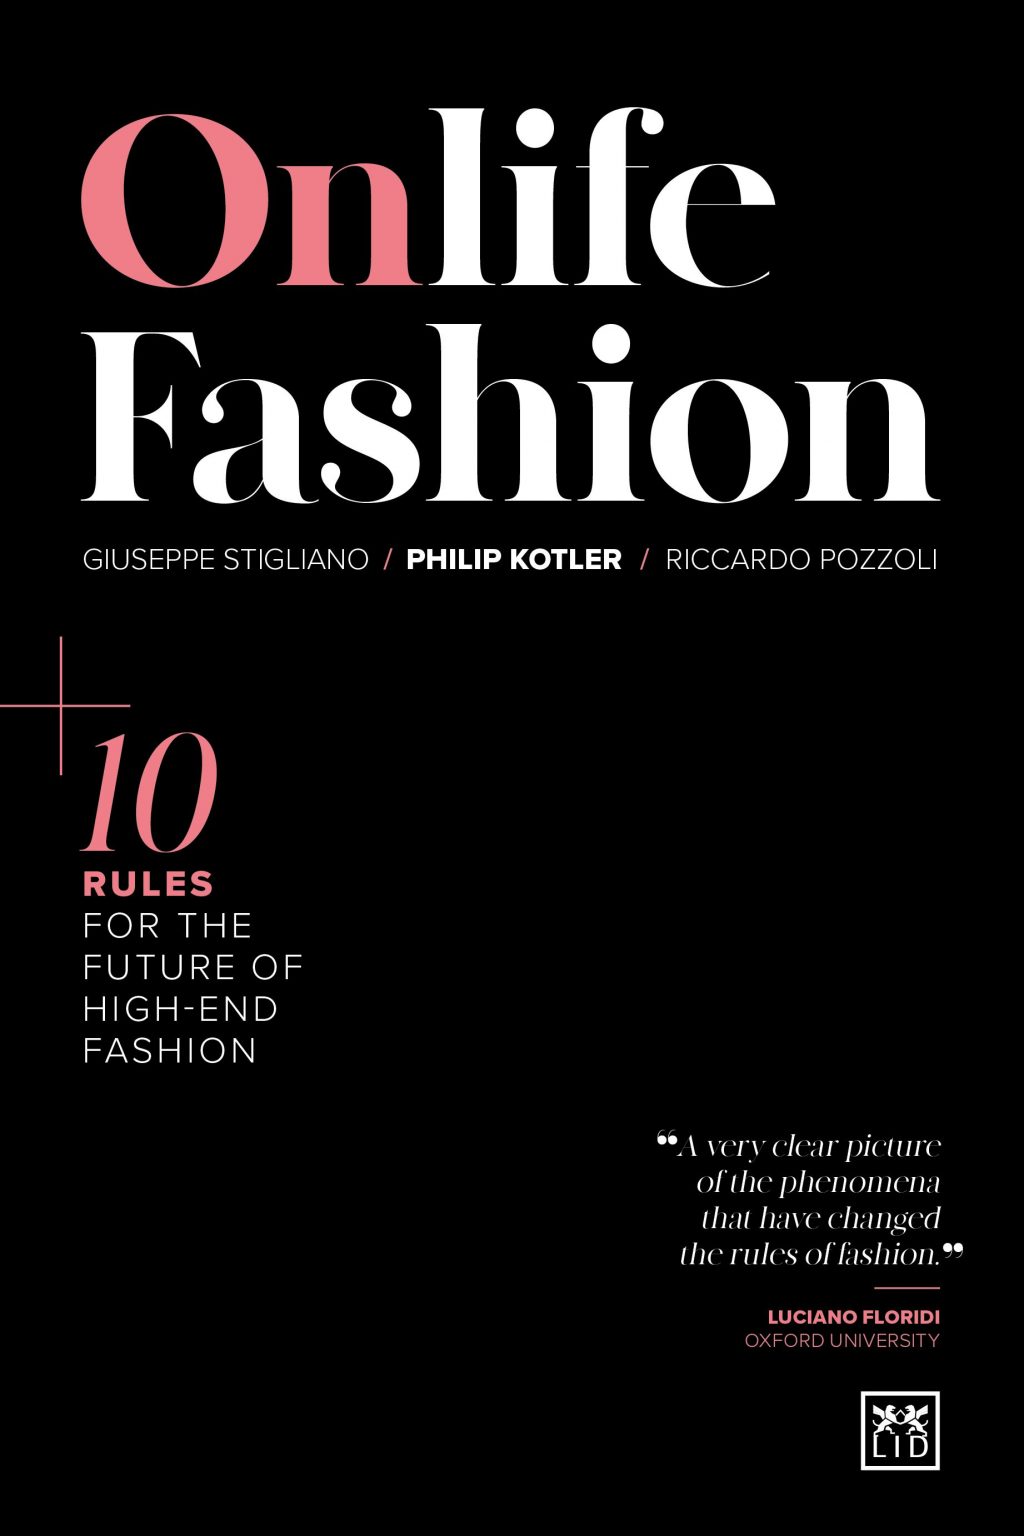 Onlife Fashion in the AMBA Book Club